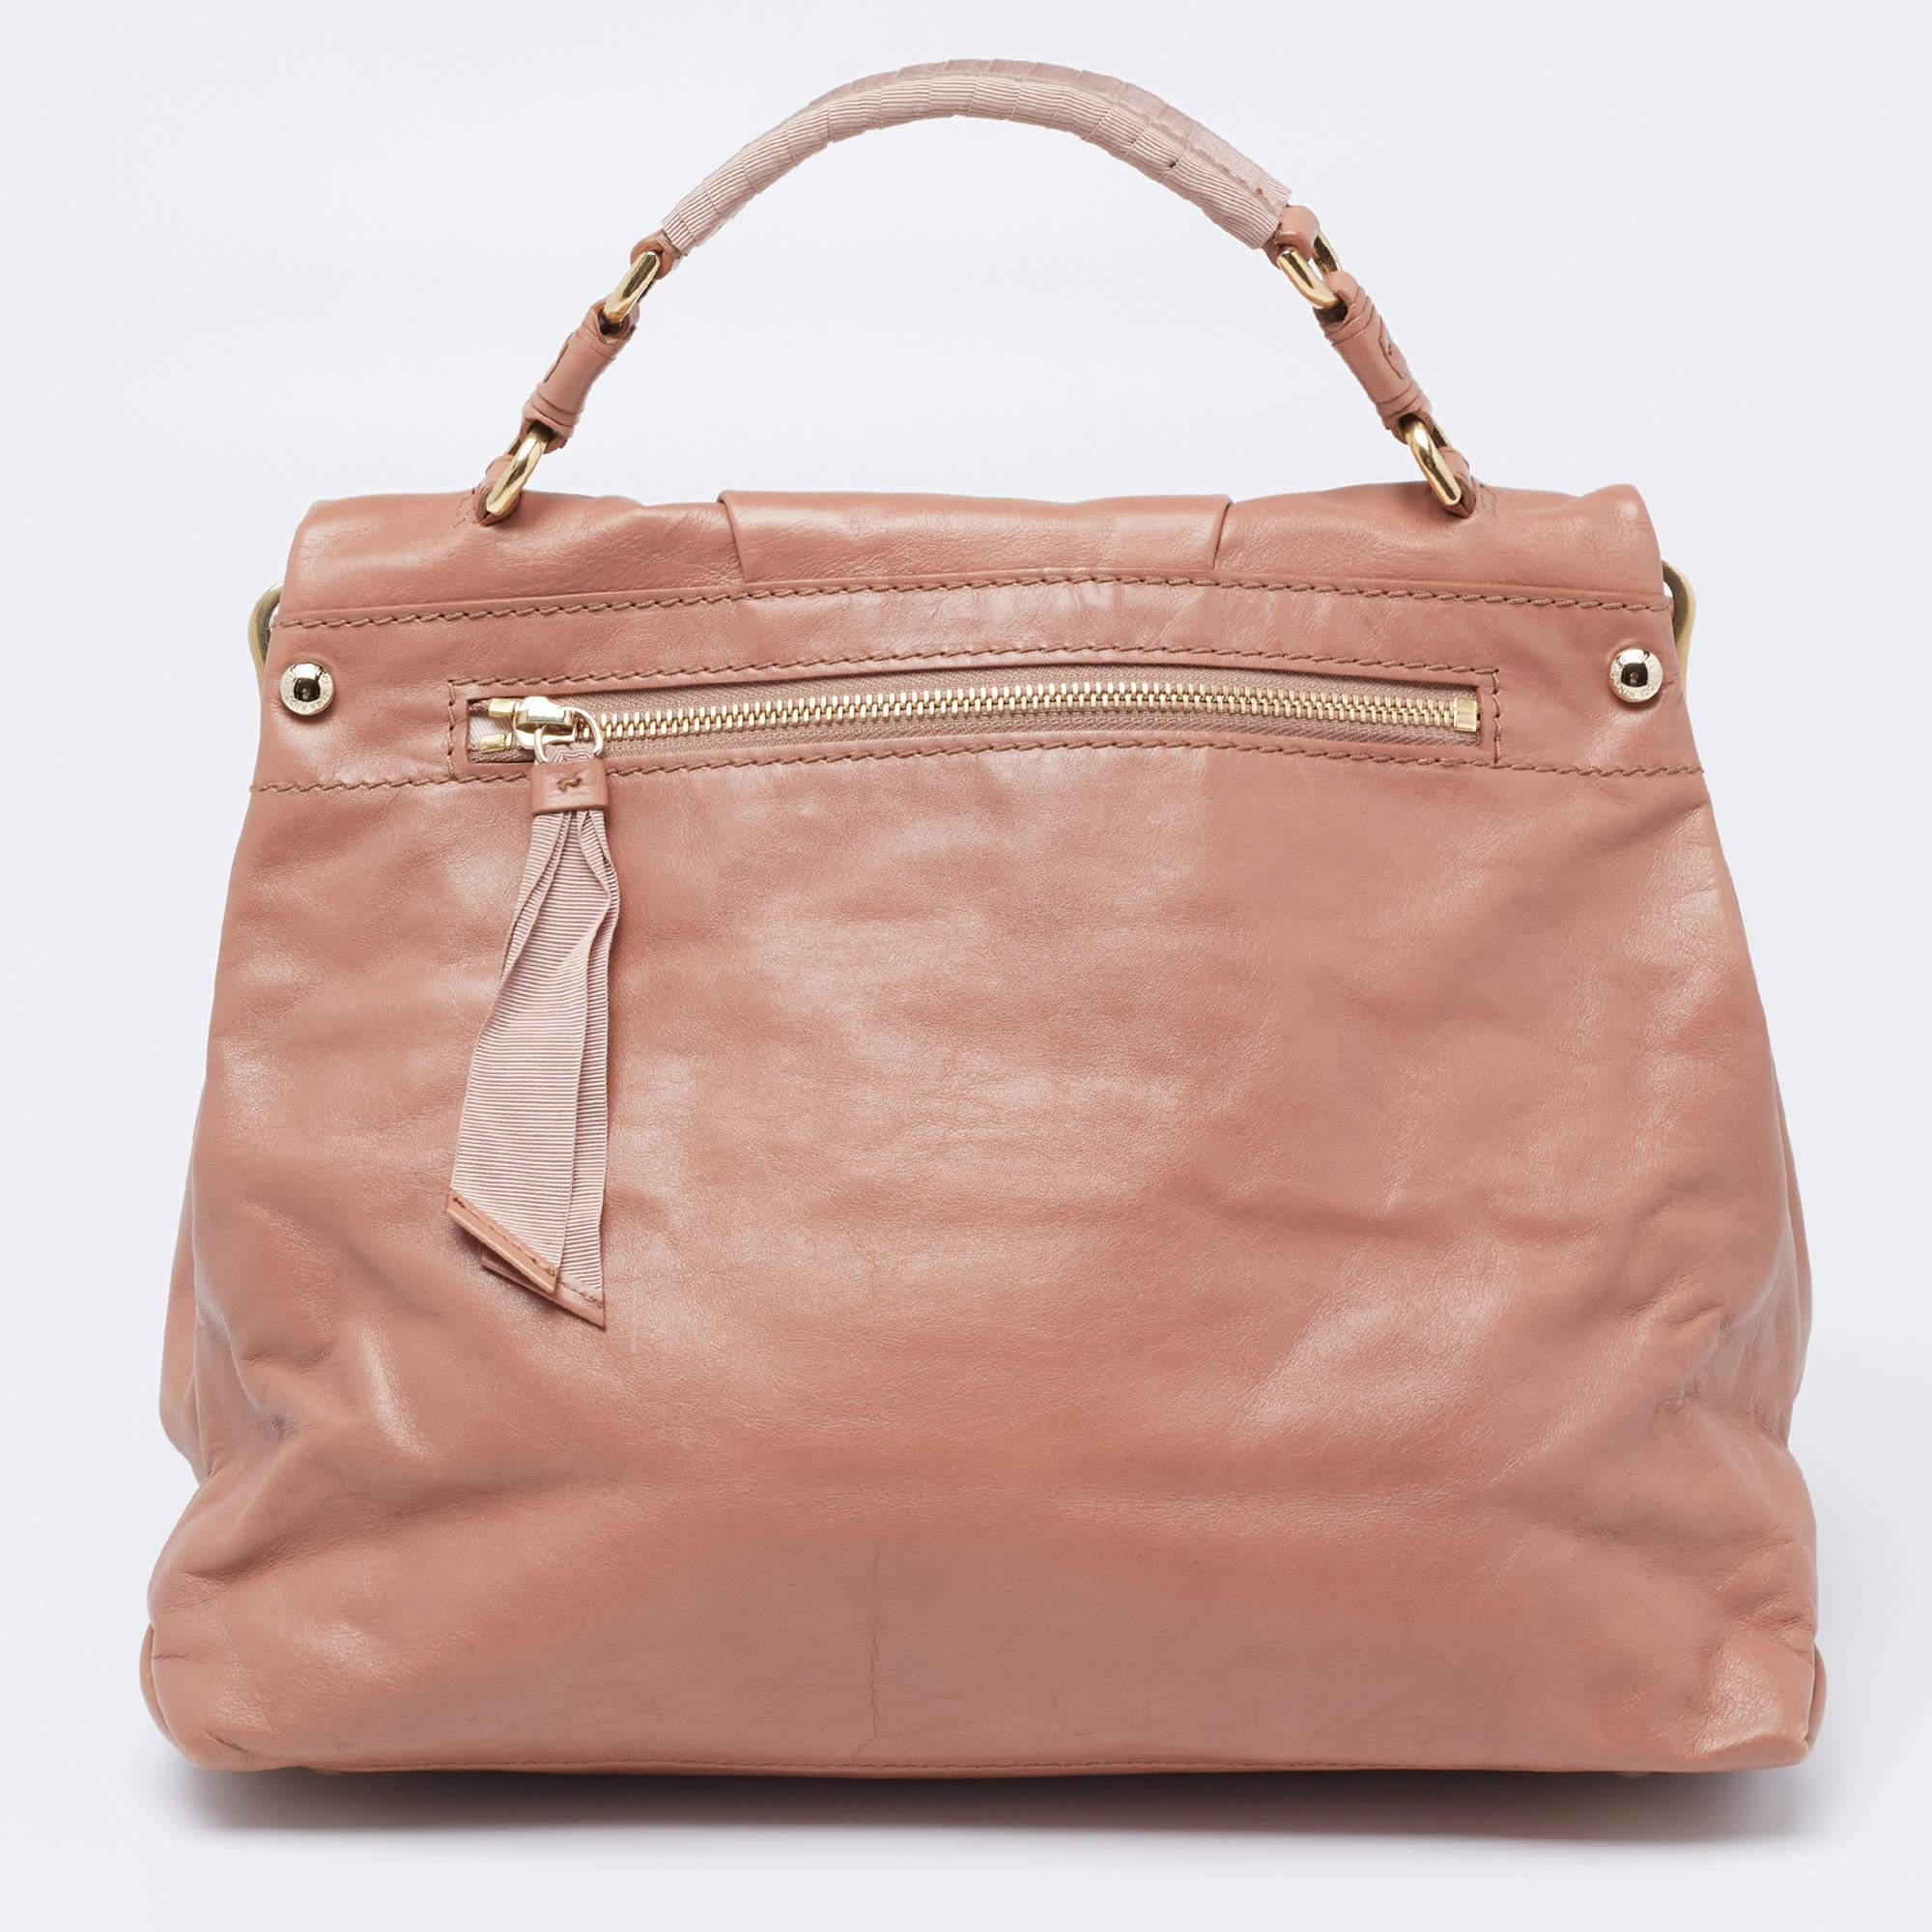 Make a striking appearance with this fashionable Liane bag by Nina Ricci. It is crafted from rose beige leather and fabric, with a sturdy handle perched on the top. This bag is completed with gold-tone hardware and a roomy canvas-lined interior. Say